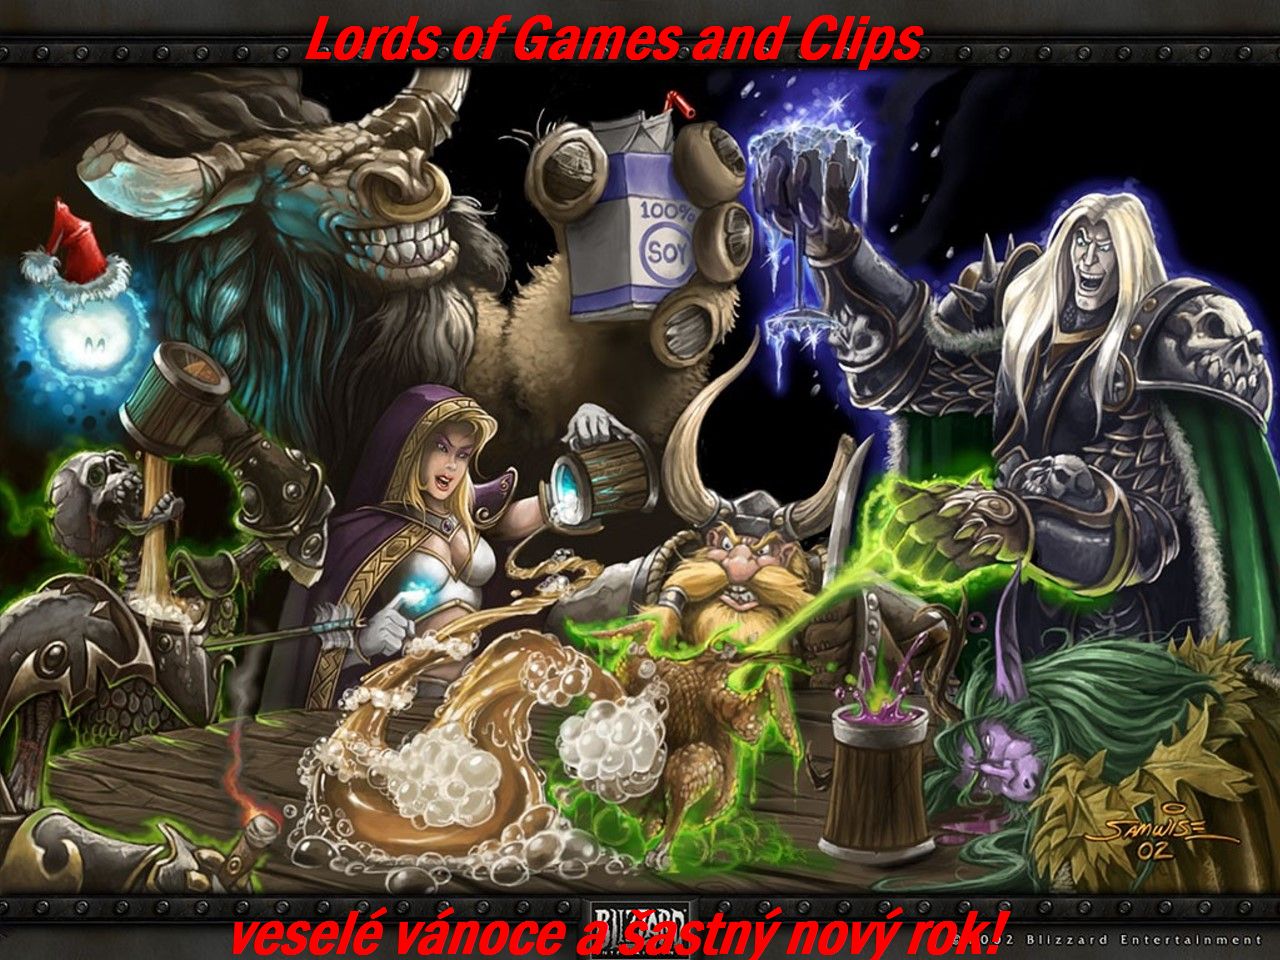 Lords of Games-New Year party